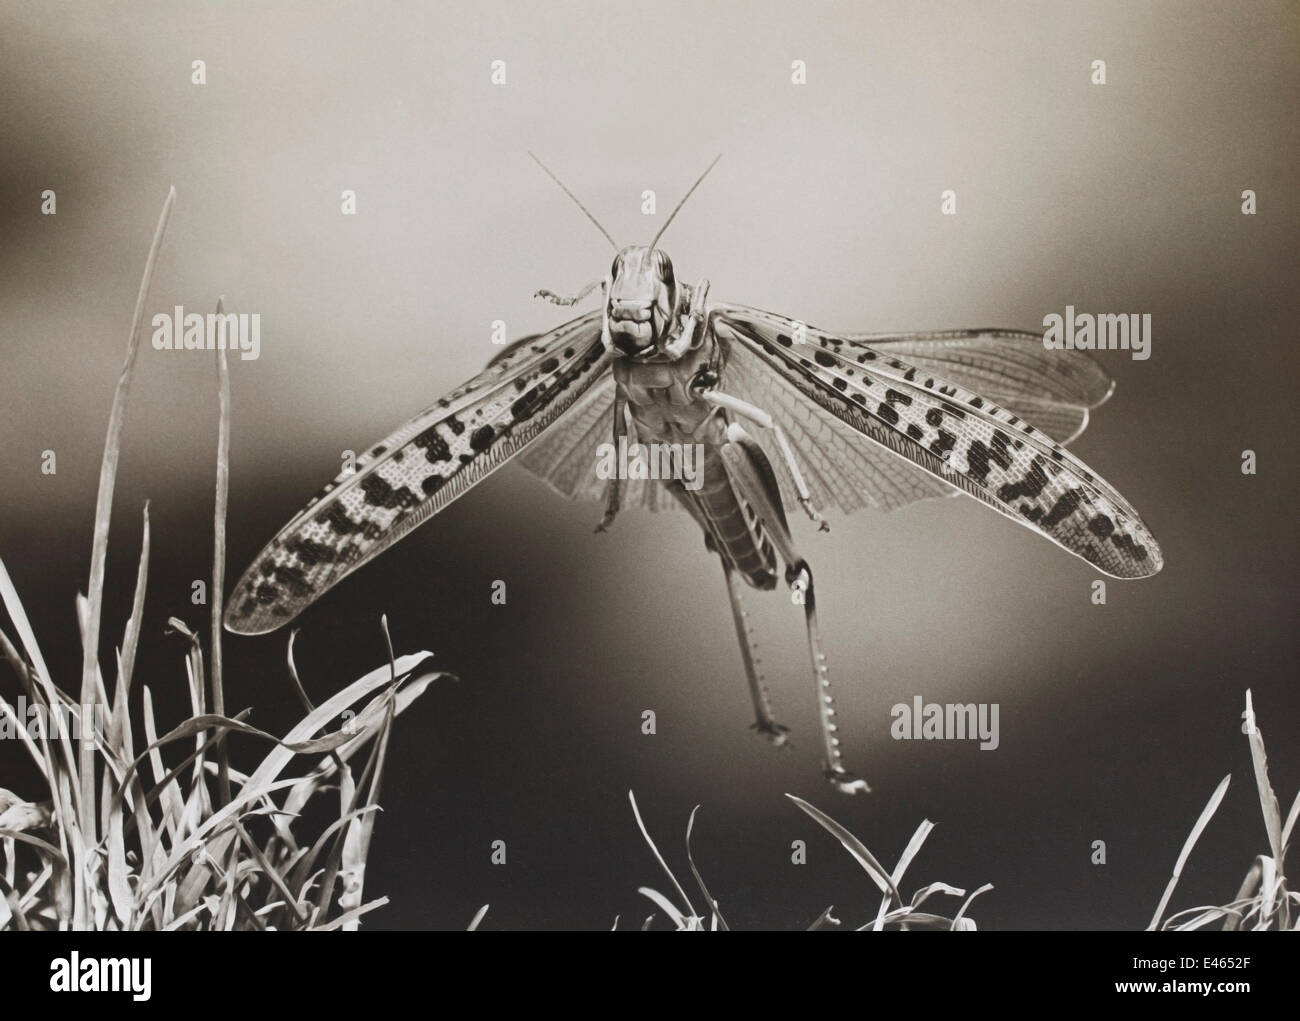 Desert Locust (Schistocerca gregaria) flying, controlled conditions, scan from black and white print Stock Photo